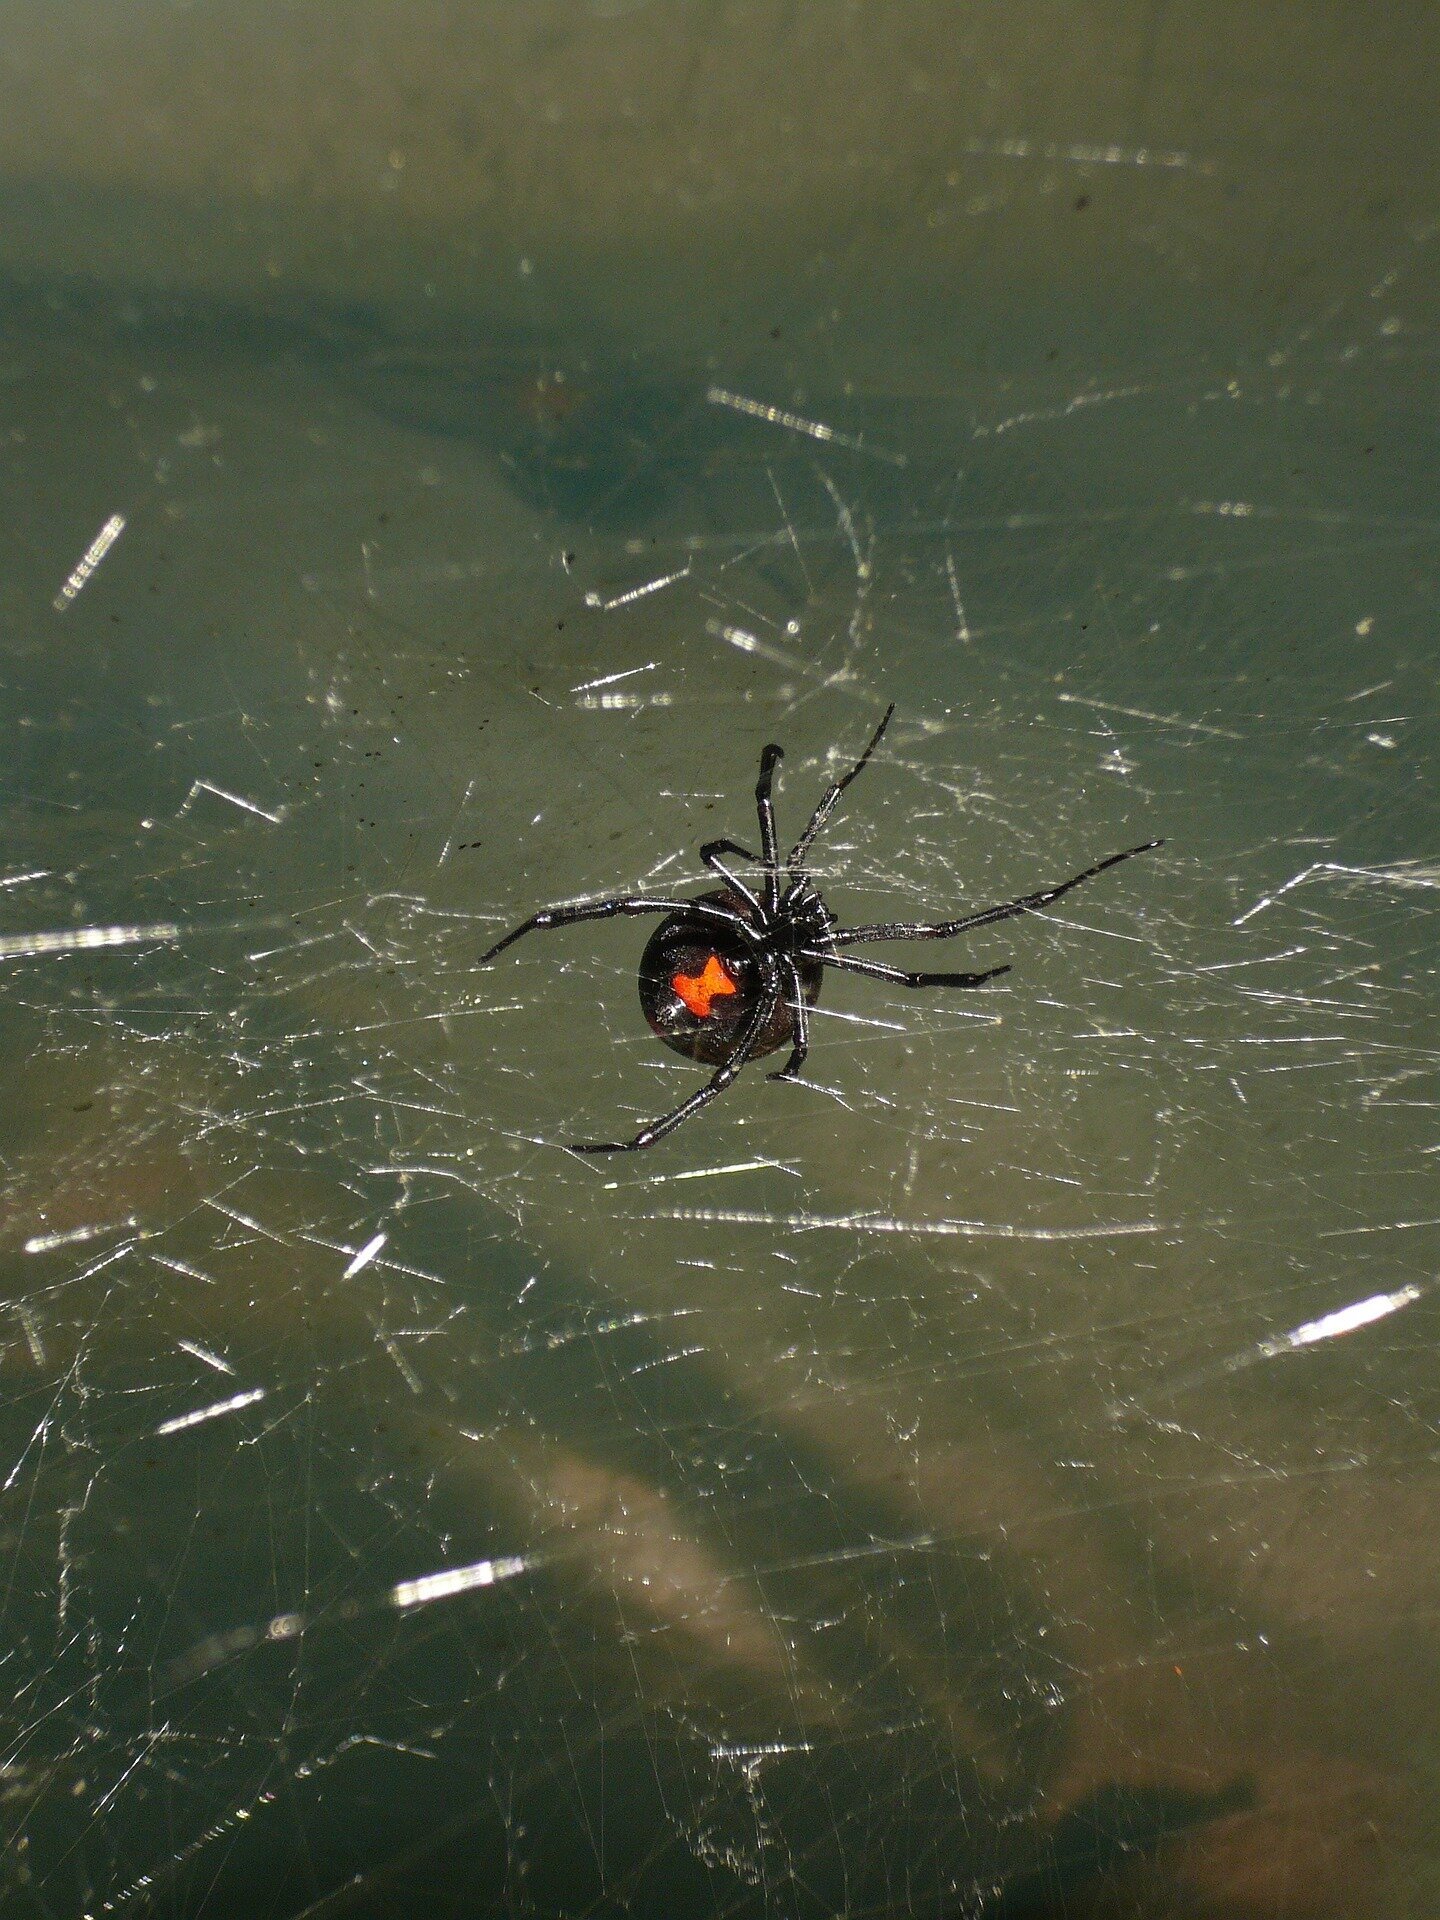 Scientists engineer human antibodies that could neutralize black widow toxin